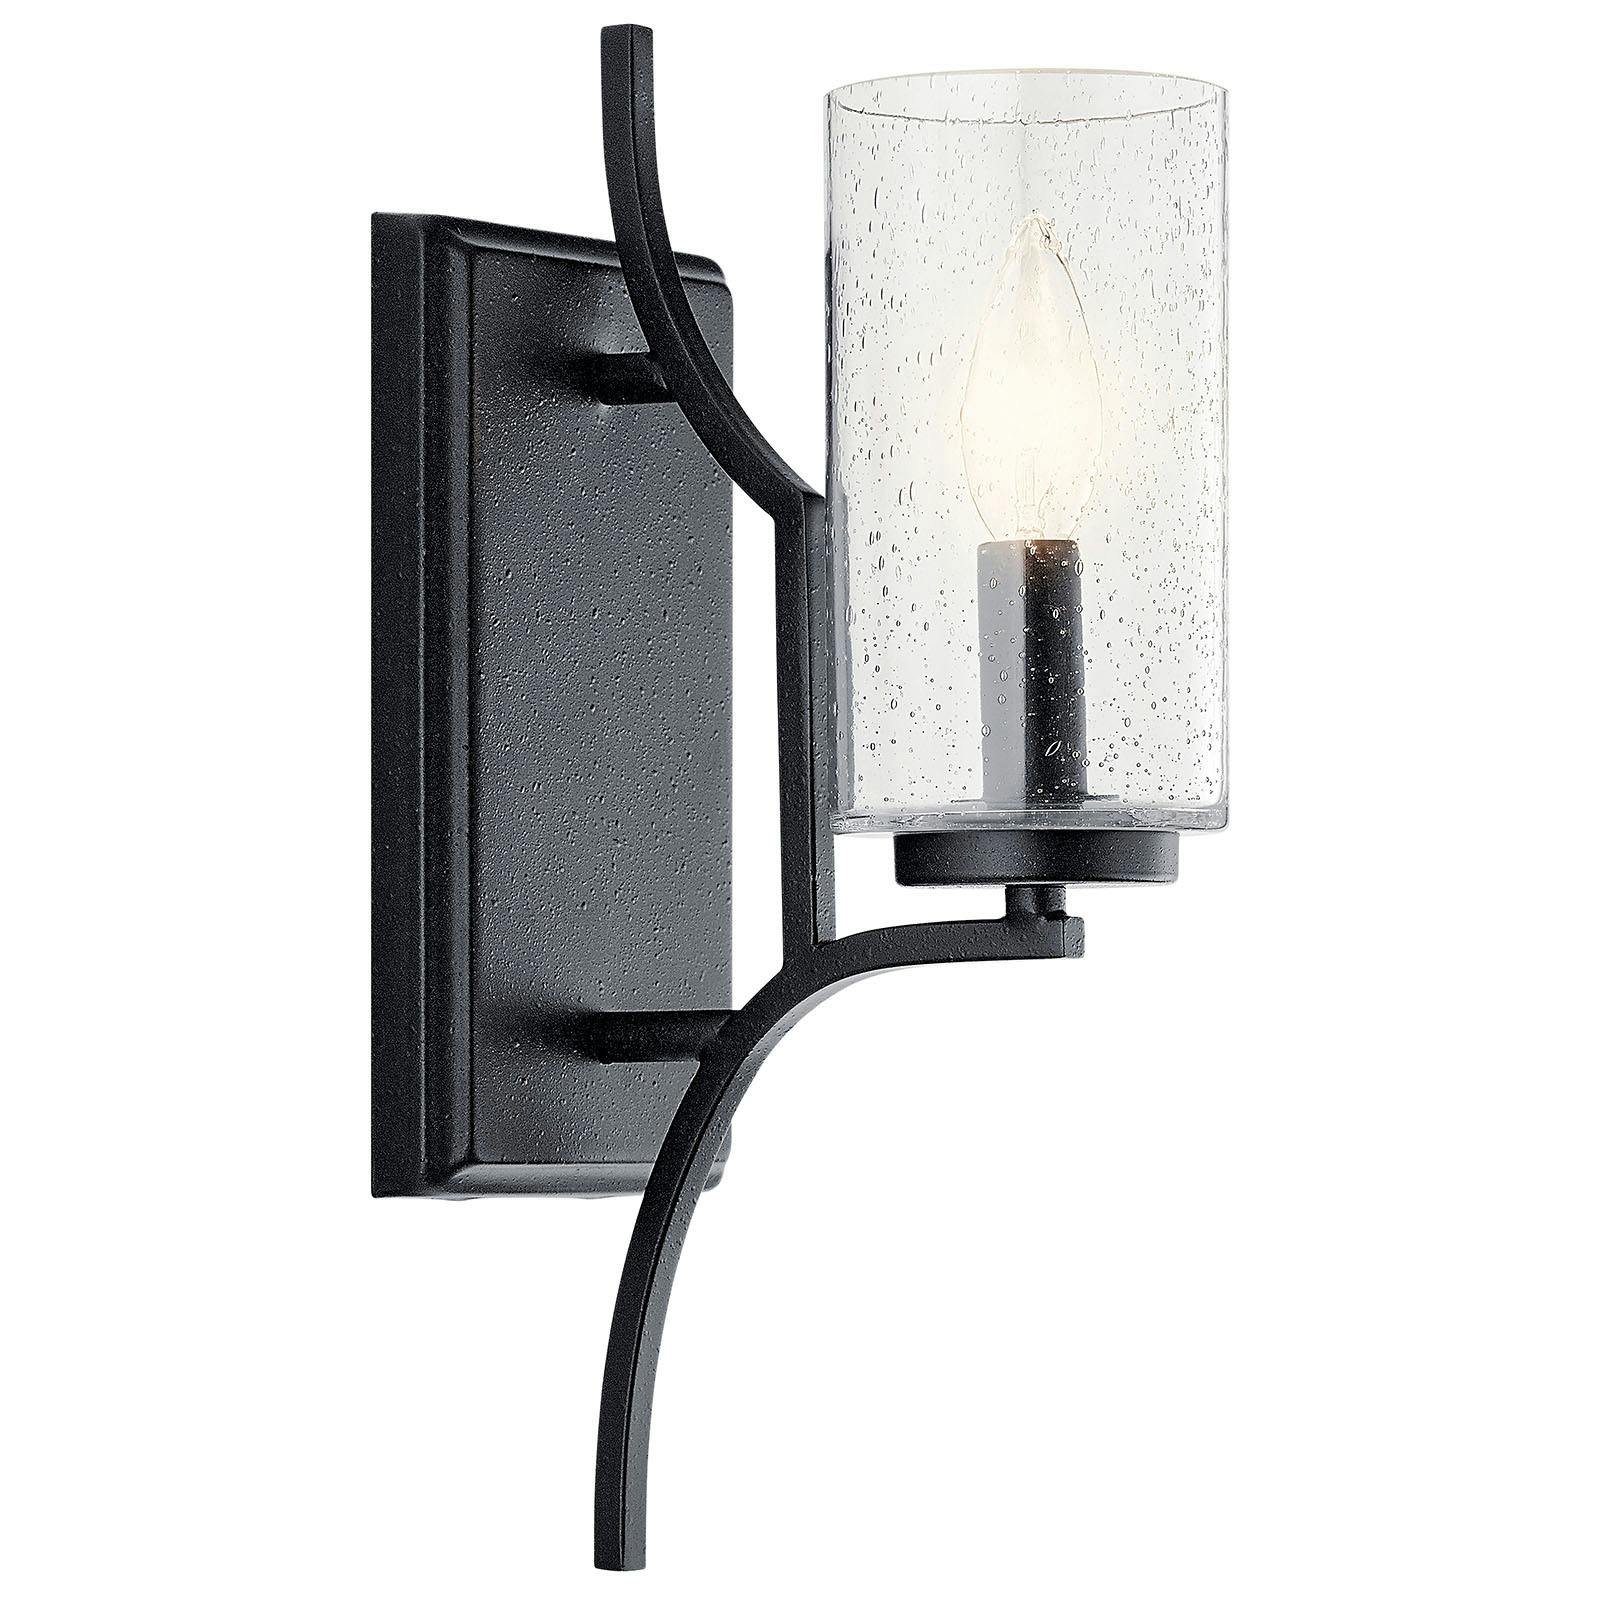 The Vara 1 Light Wall Sconce Distressed Black facing up on a white background